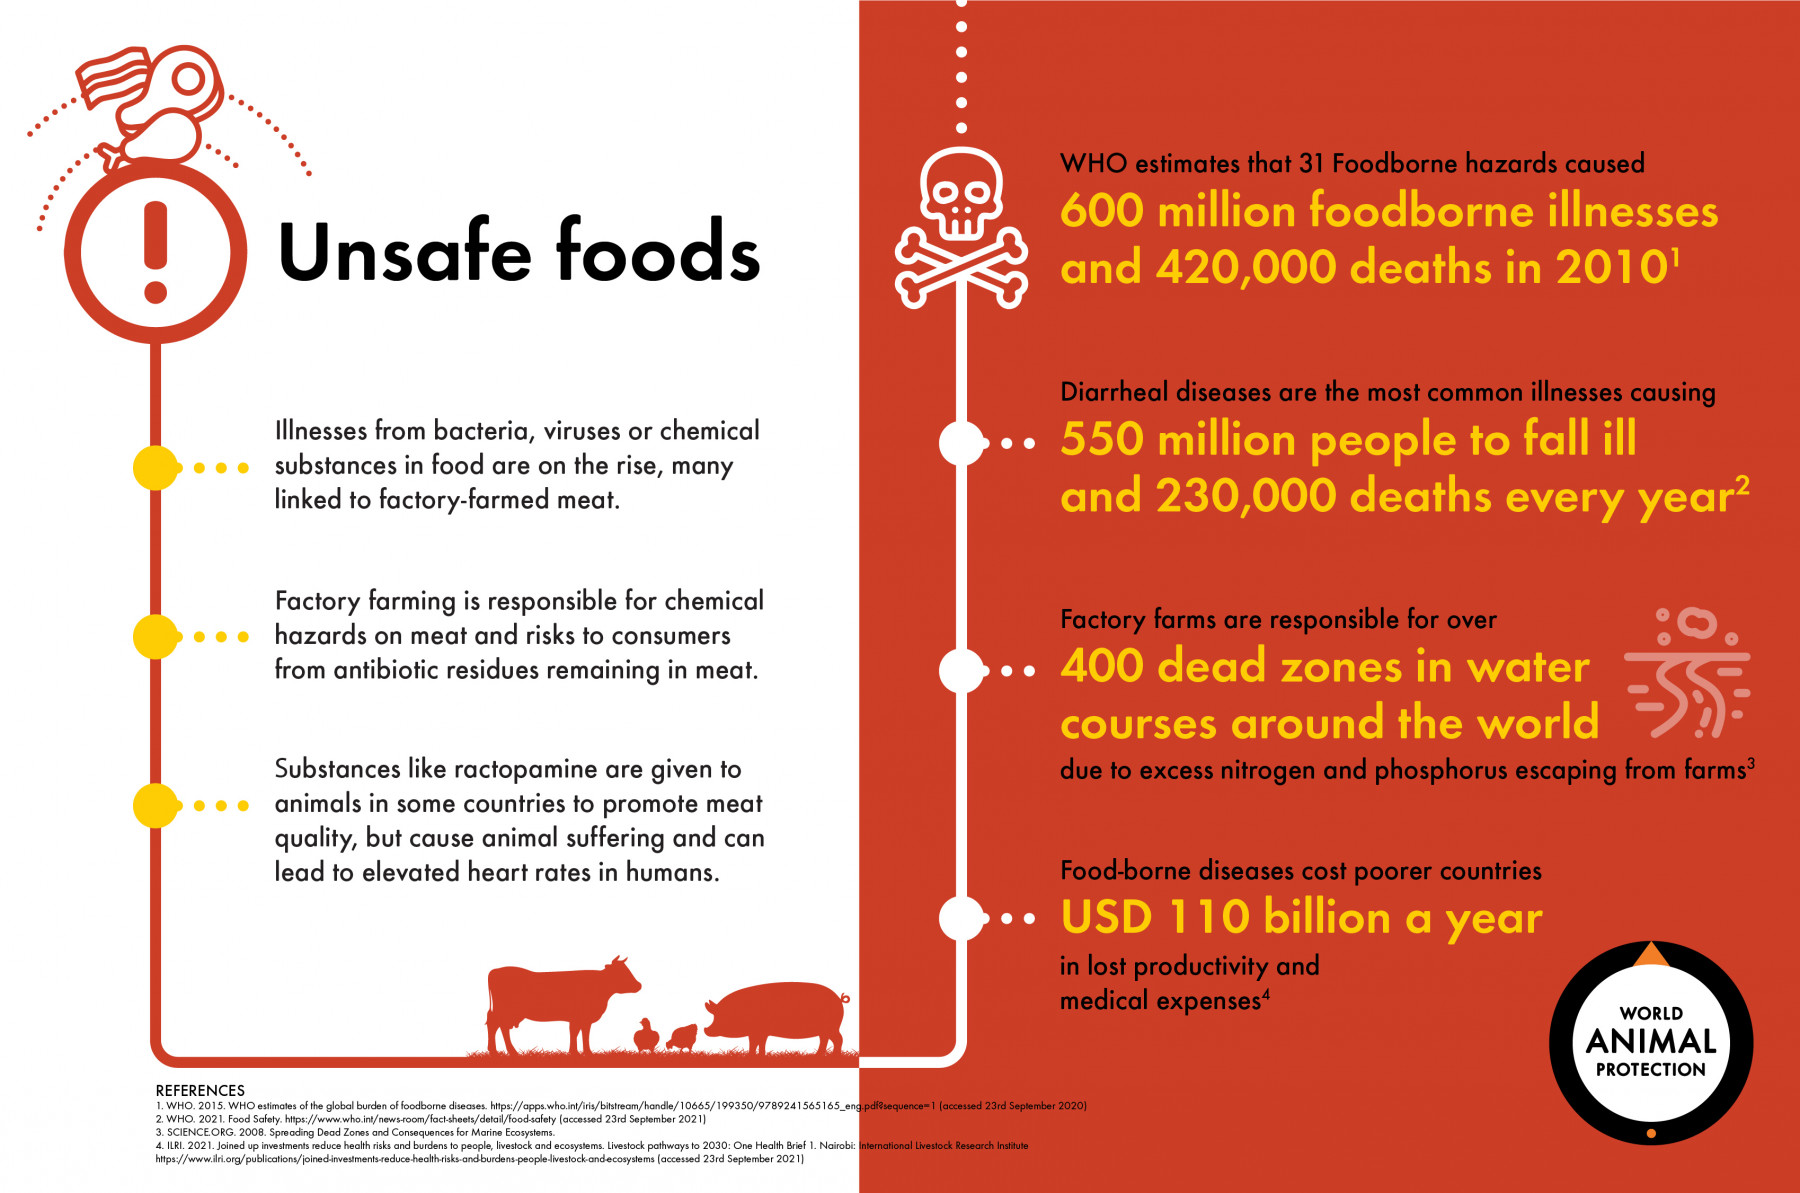 The hidden health impacts of factory farming | World Animal Protection